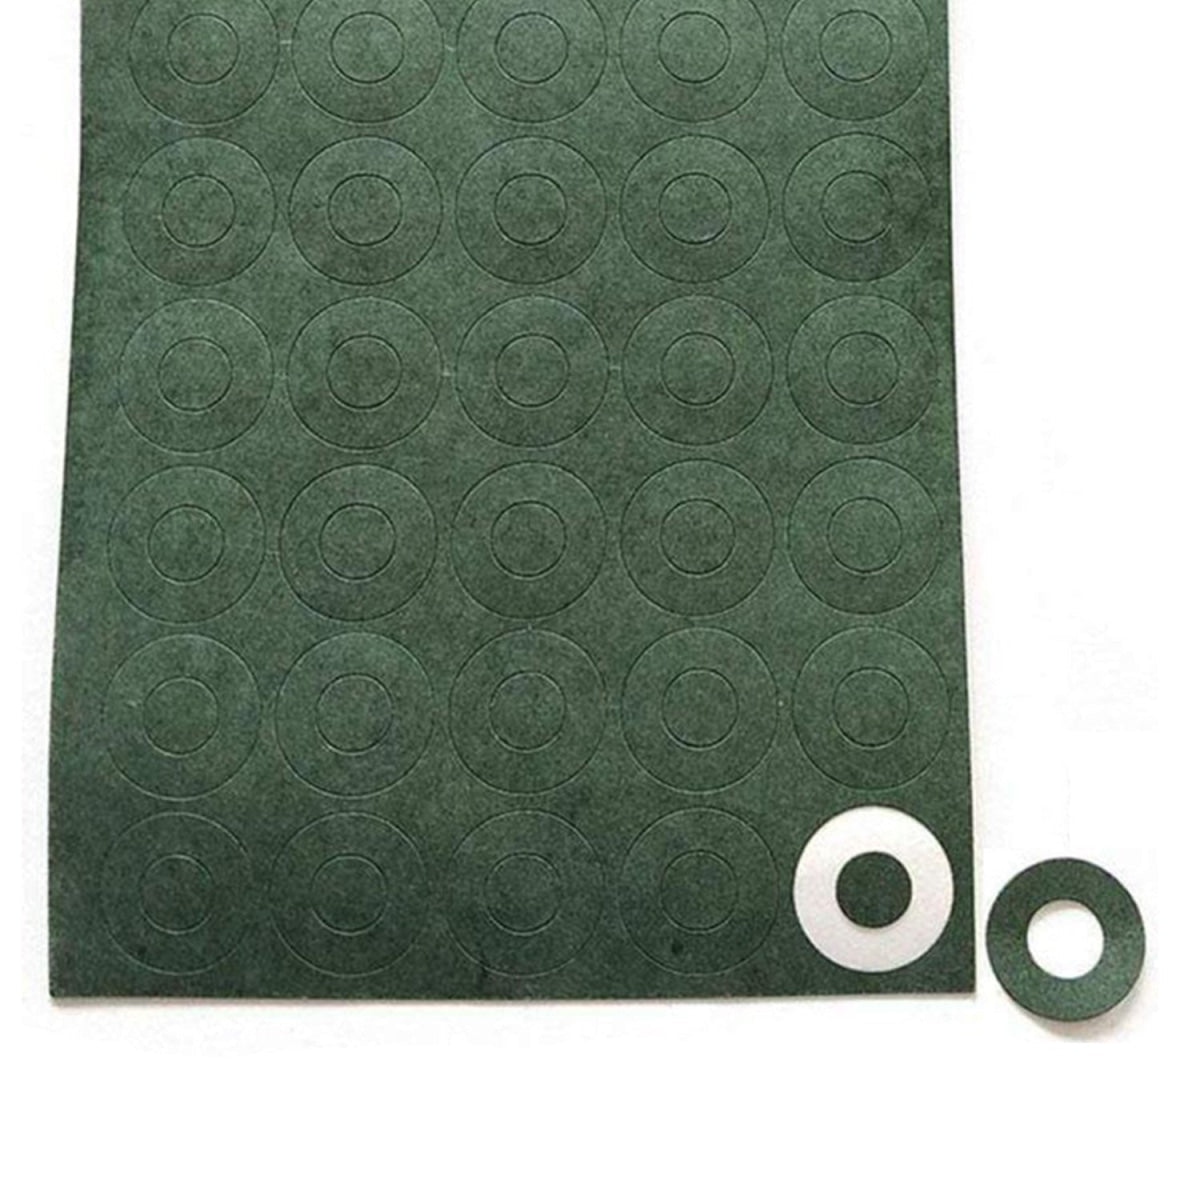 10mtr / 1000pcs 1S 18650 Barley Paper Li-ion Battery Insulation Gasket for Battery Pack Pad - 1000 circle outlines - - Asia Sell